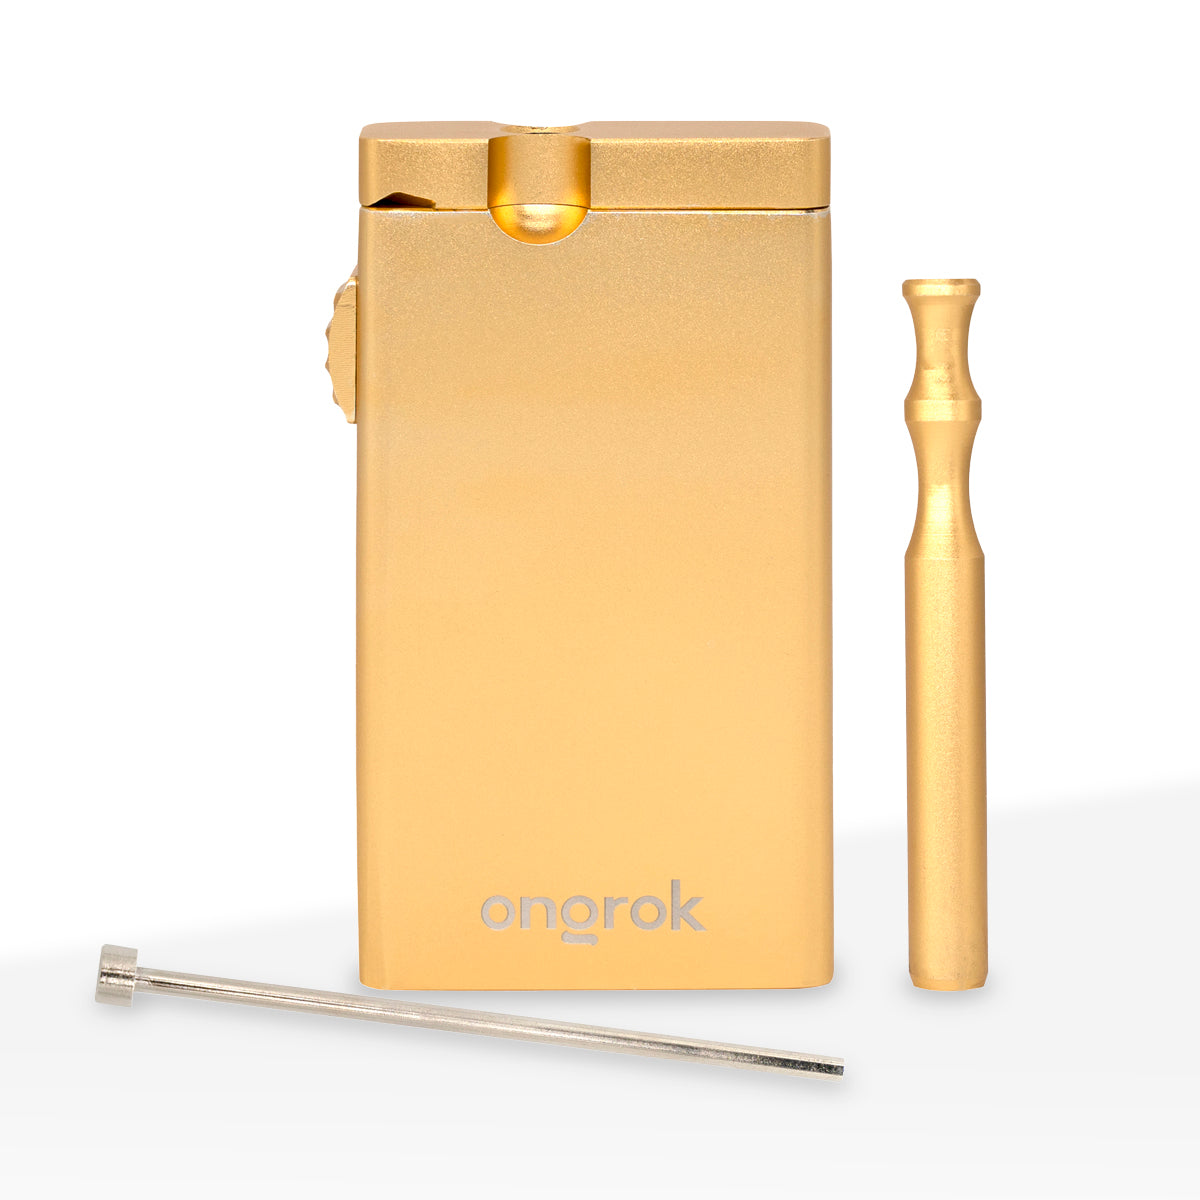 ONGROK Dugout with Aluminum One-Hitter Pipe